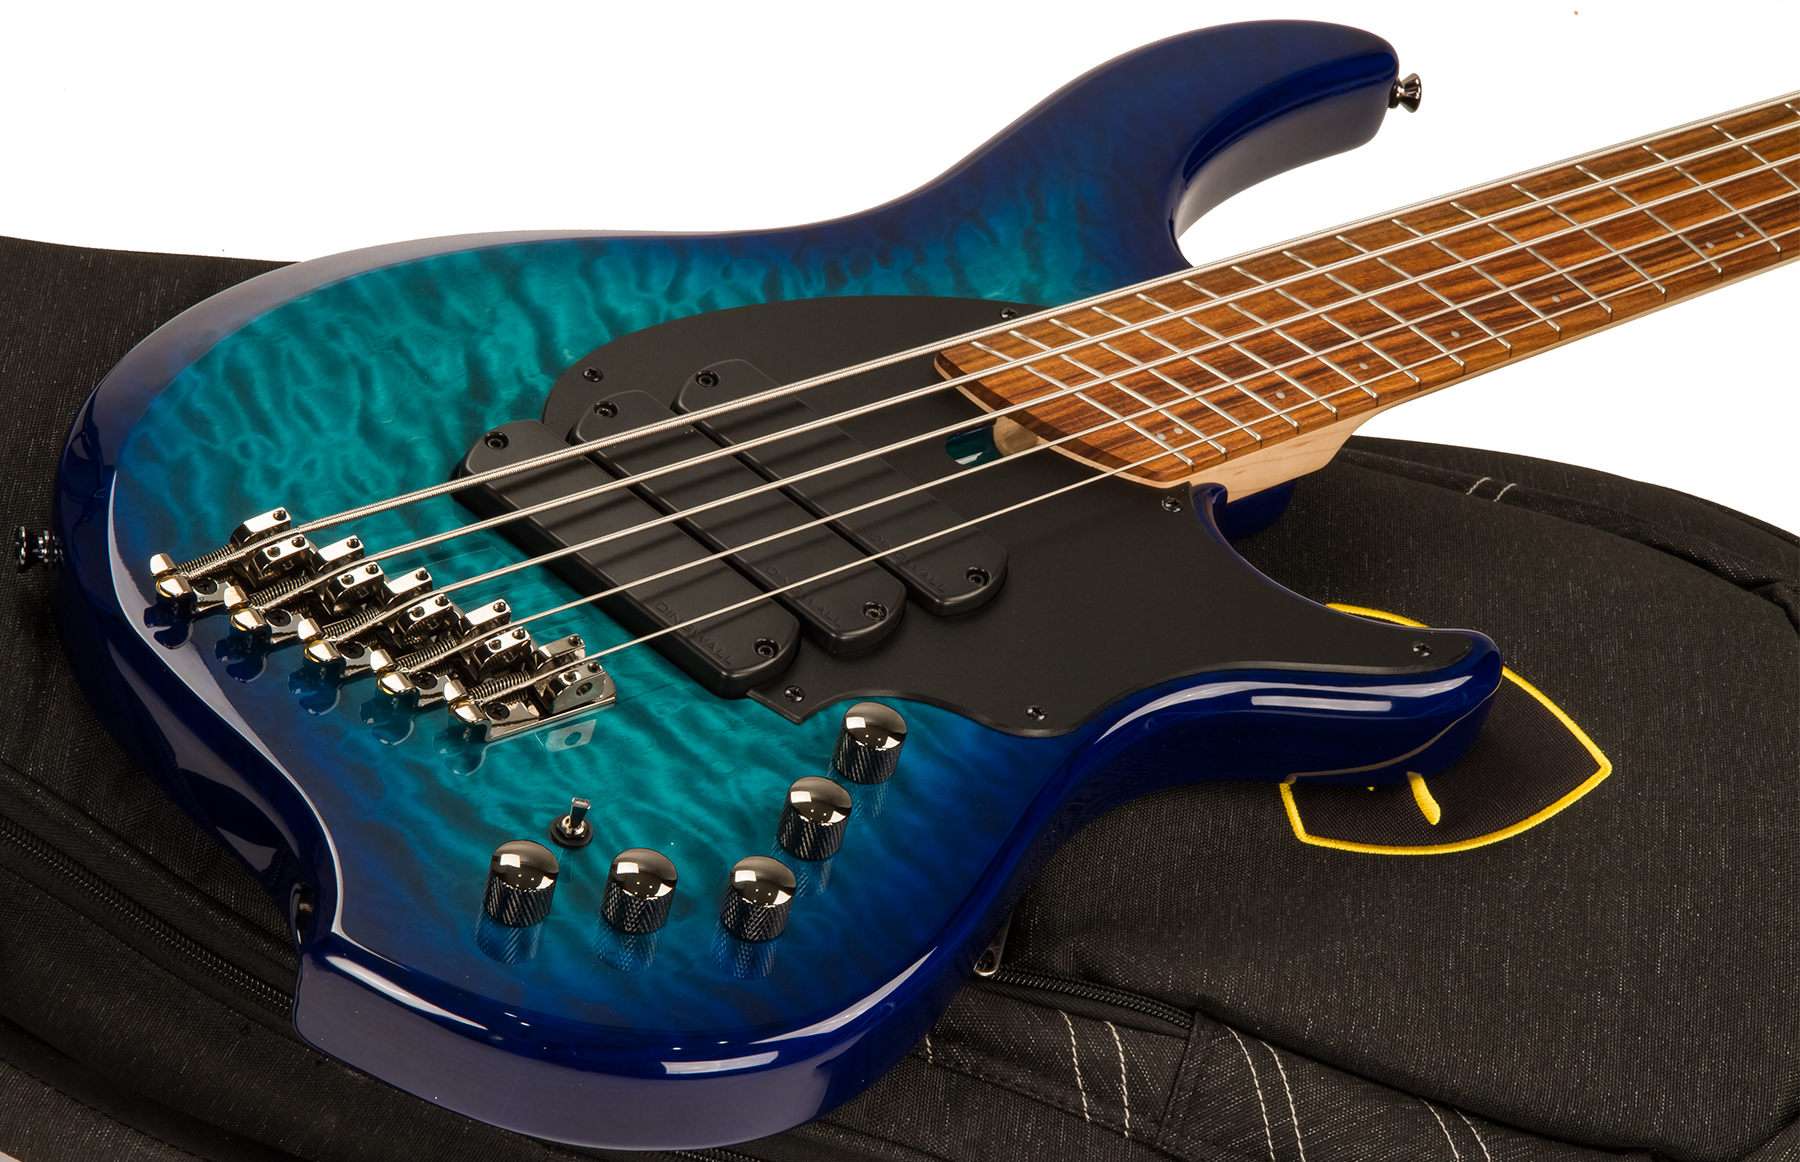 Dingwall Combustion 5 3-pickups Pf +housse - Whalepool Burst - Solidbody E-bass - Variation 3